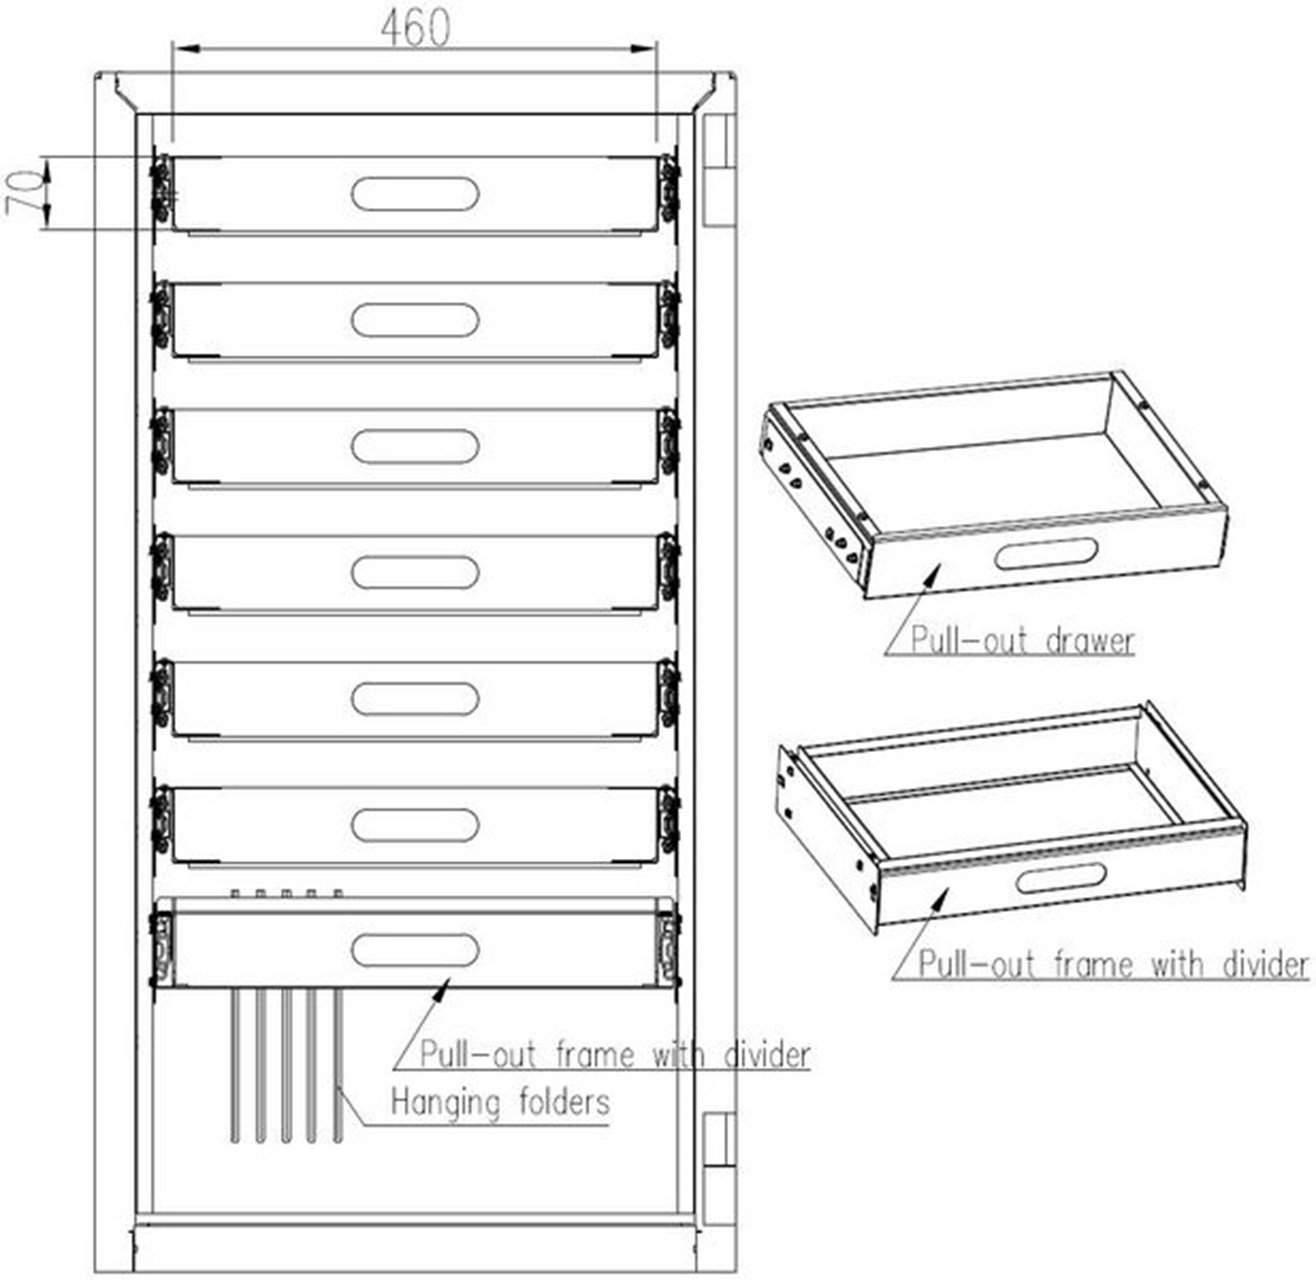 Pull-out drawers, model 6